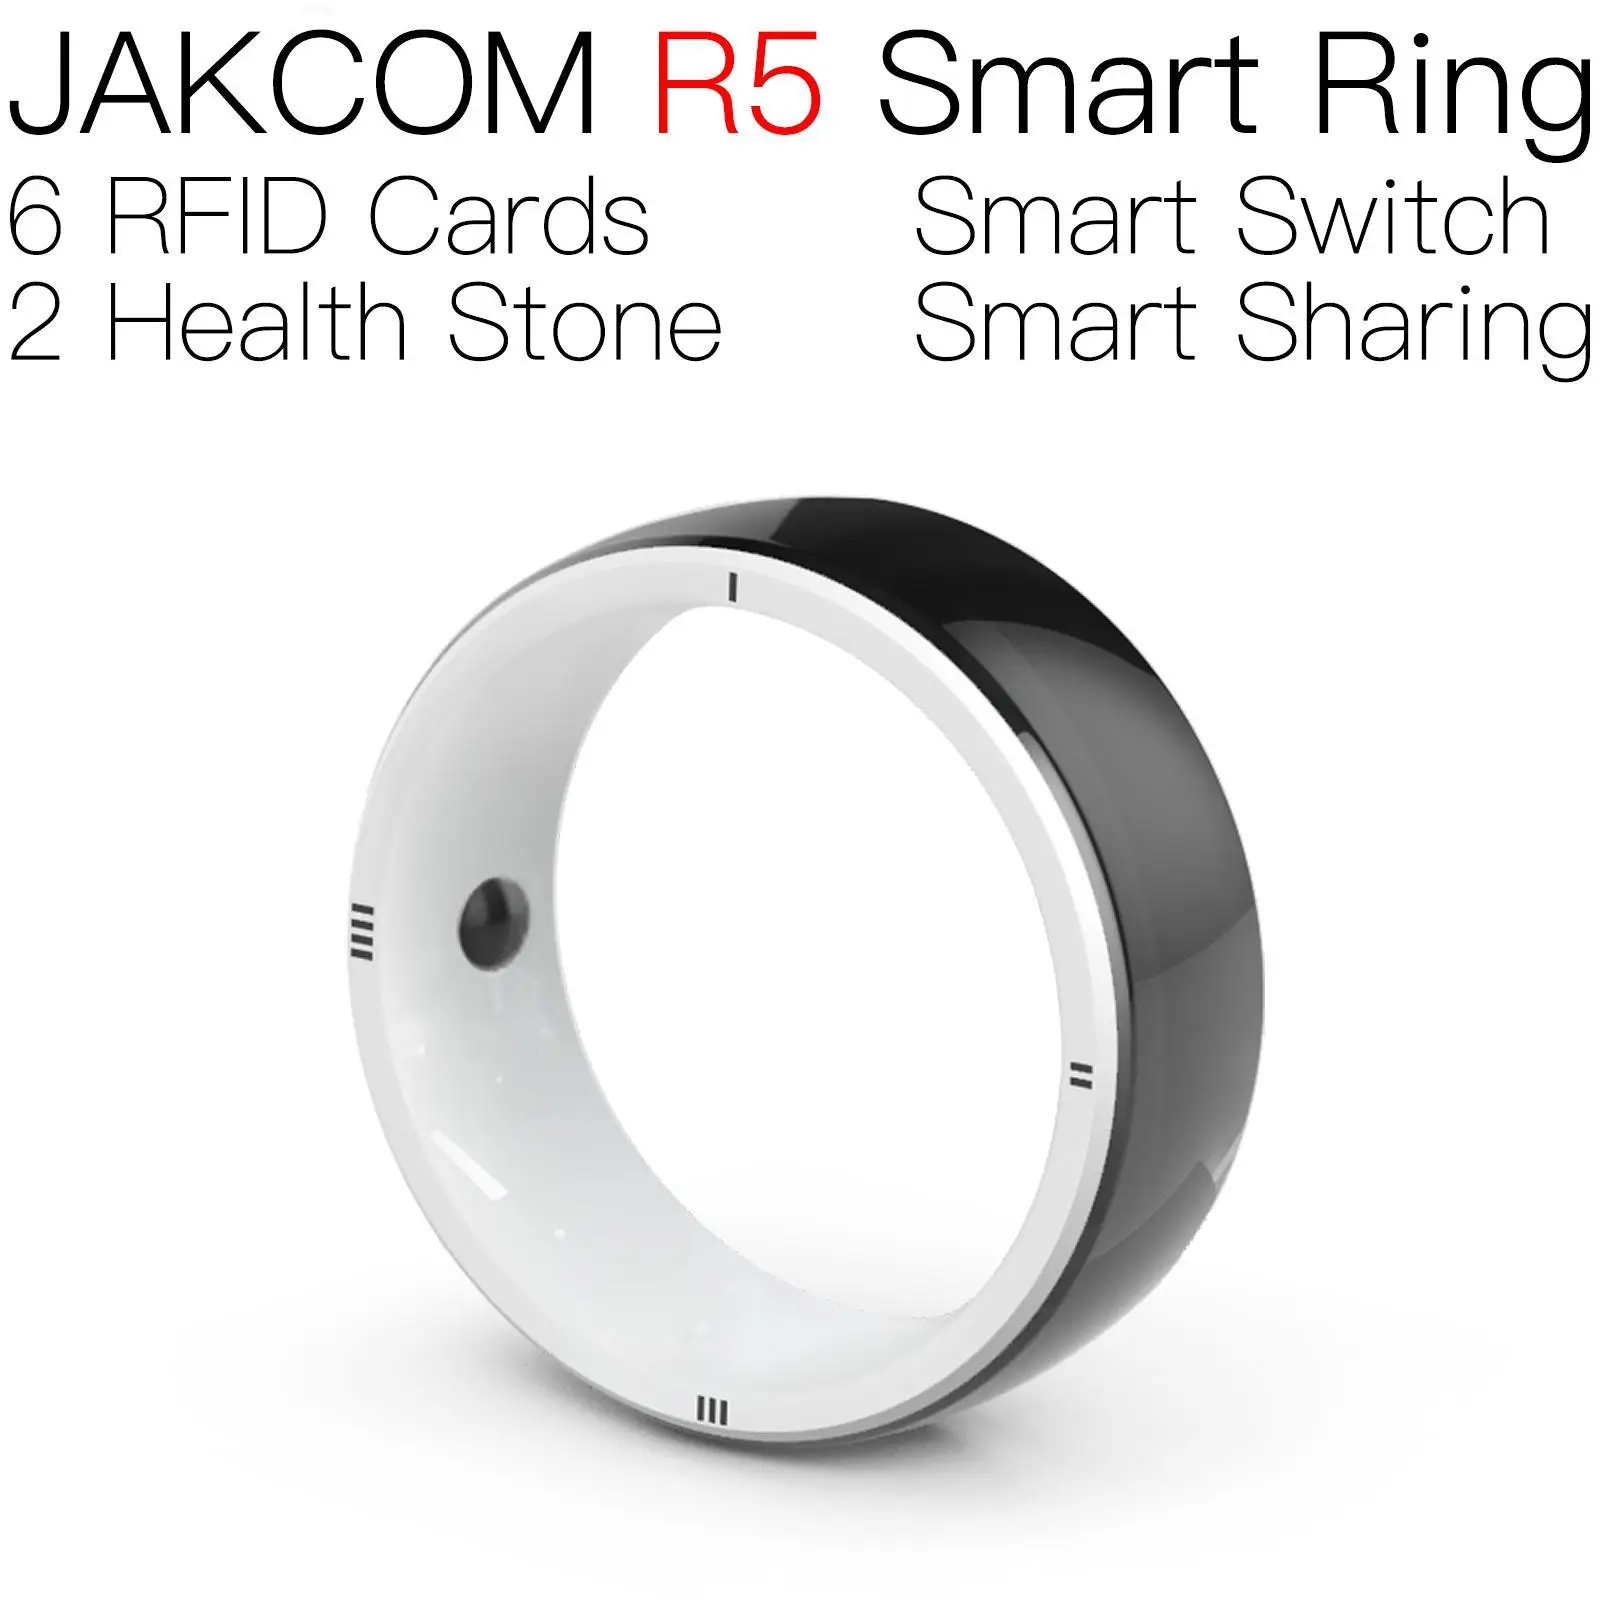 

JAKCOM R5 Smart Ring Super value as smartcard ita nfc uid changeable uhf 860 rfid card sticker tag with sound polyimide label